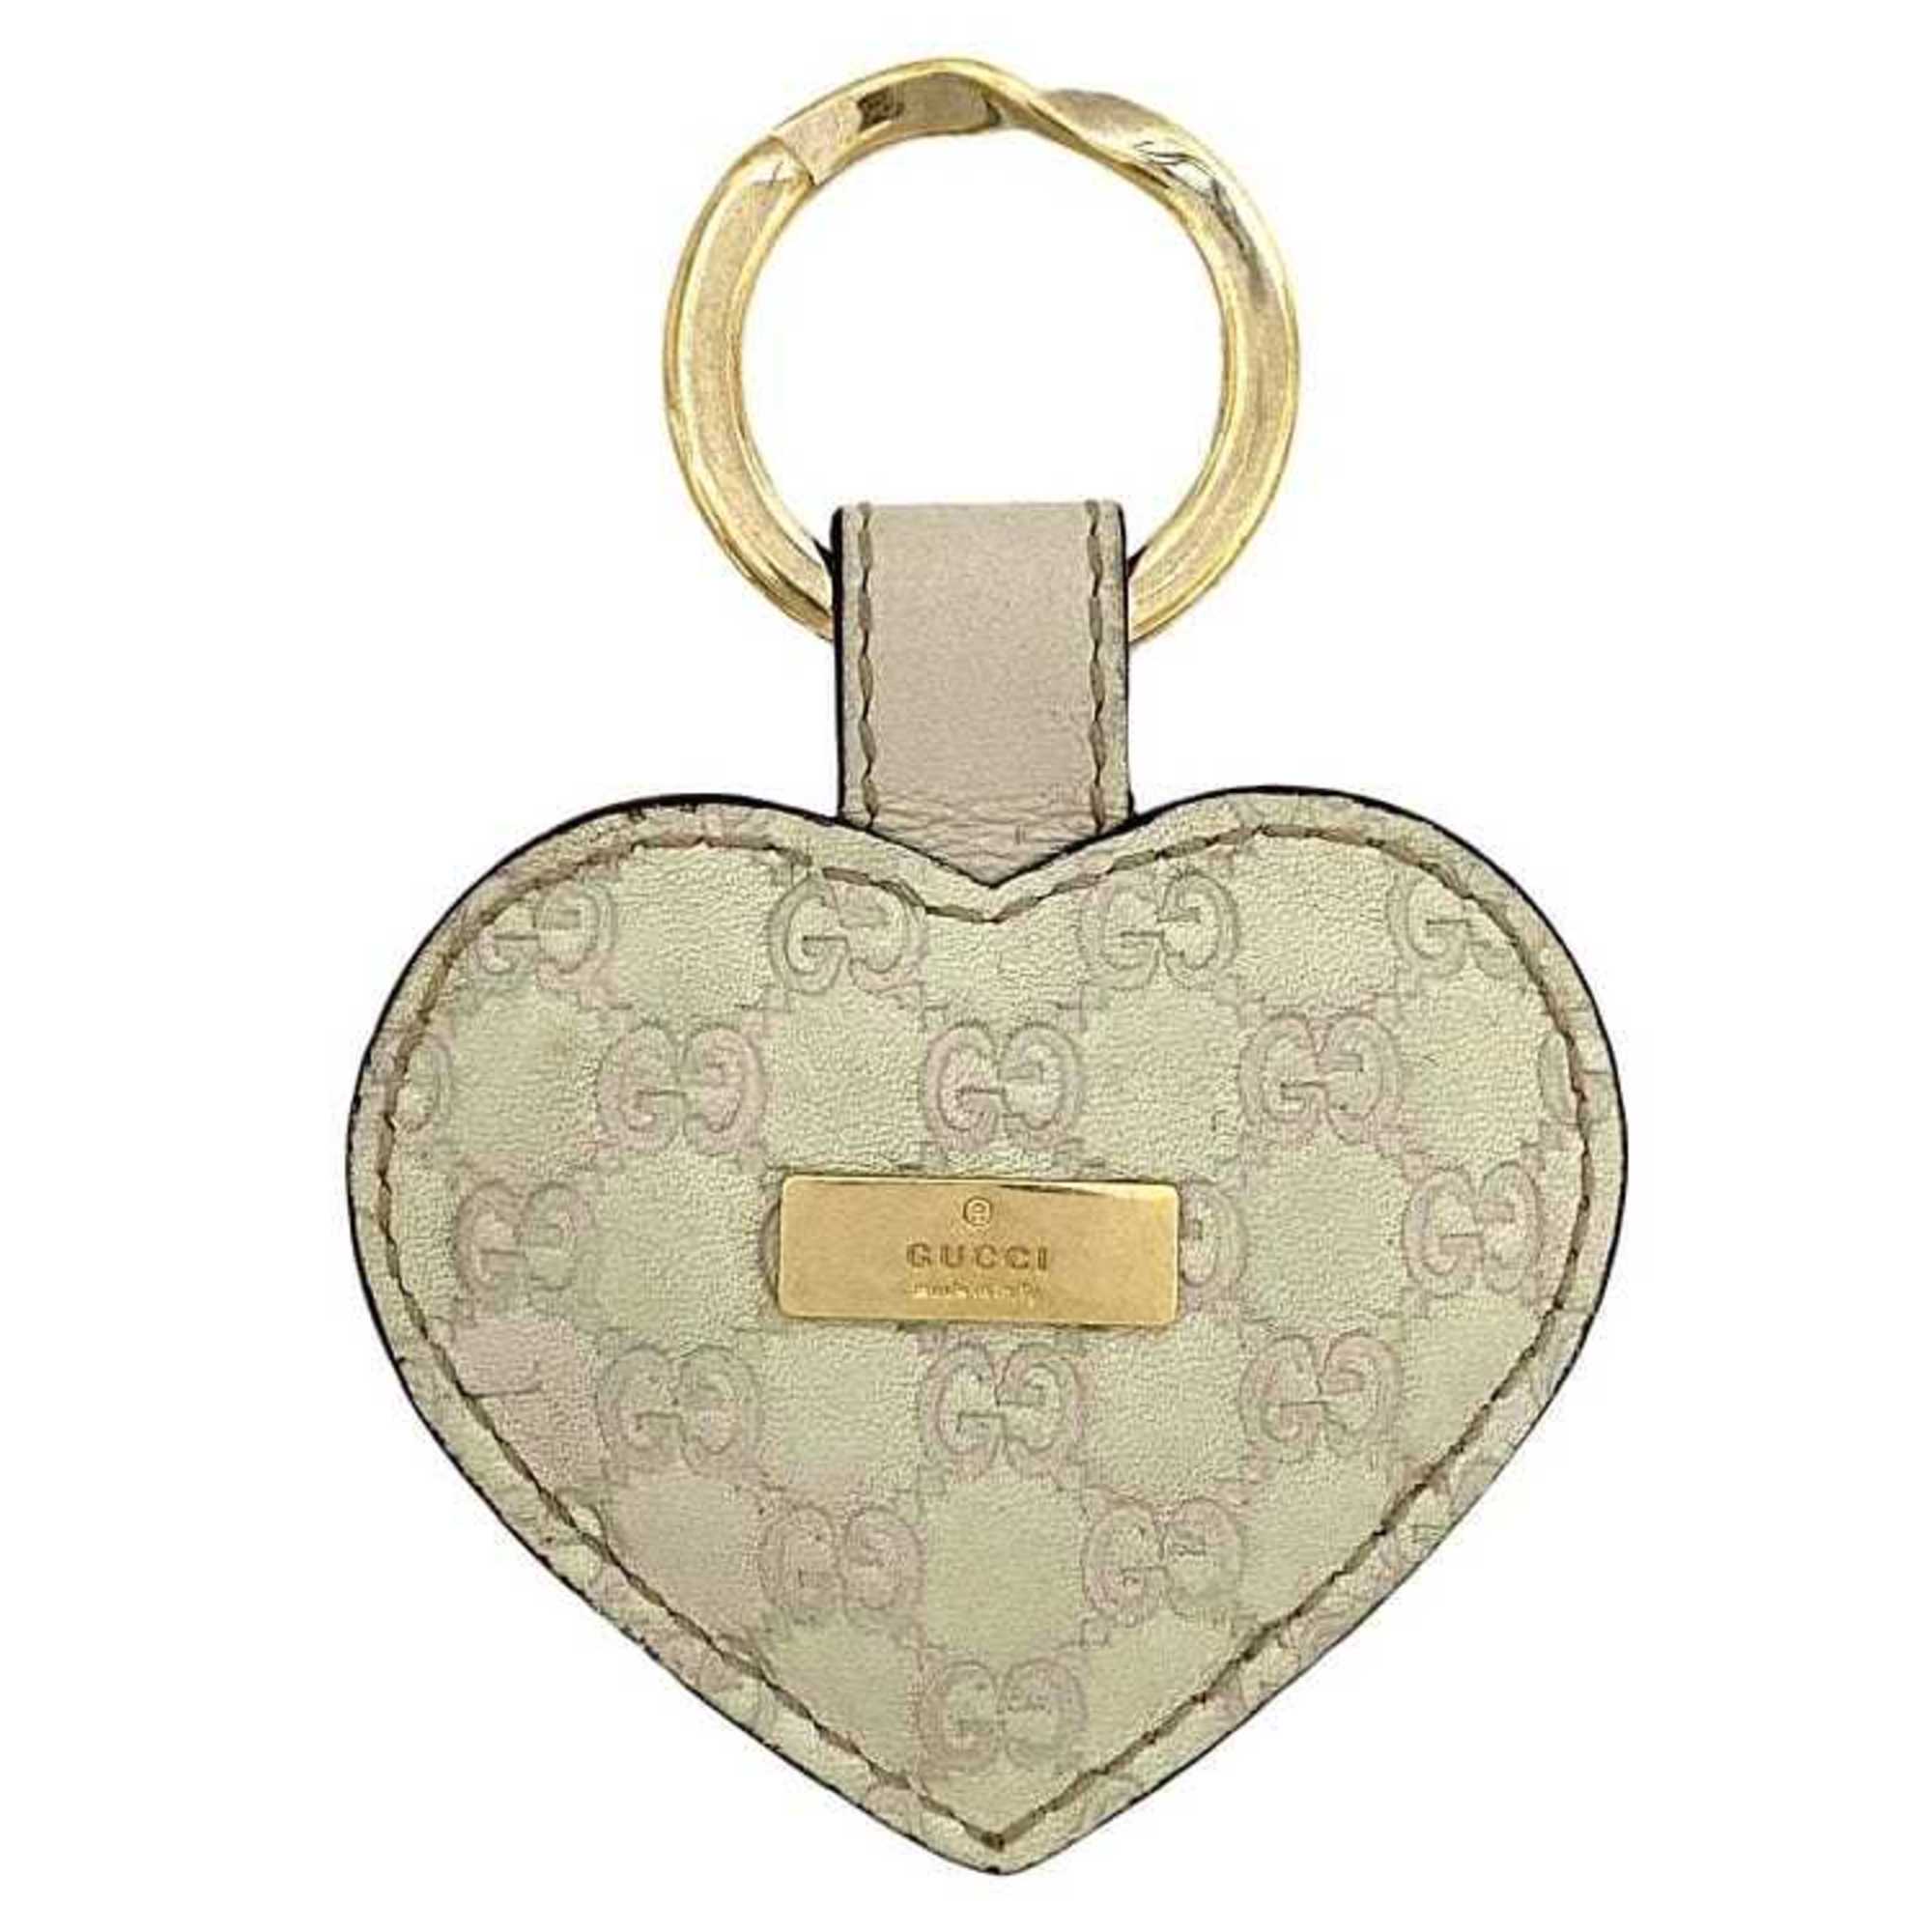 Gucci key holder beige gold sima 199915 heart GG leather GP GUCCI ring charm bag ladies